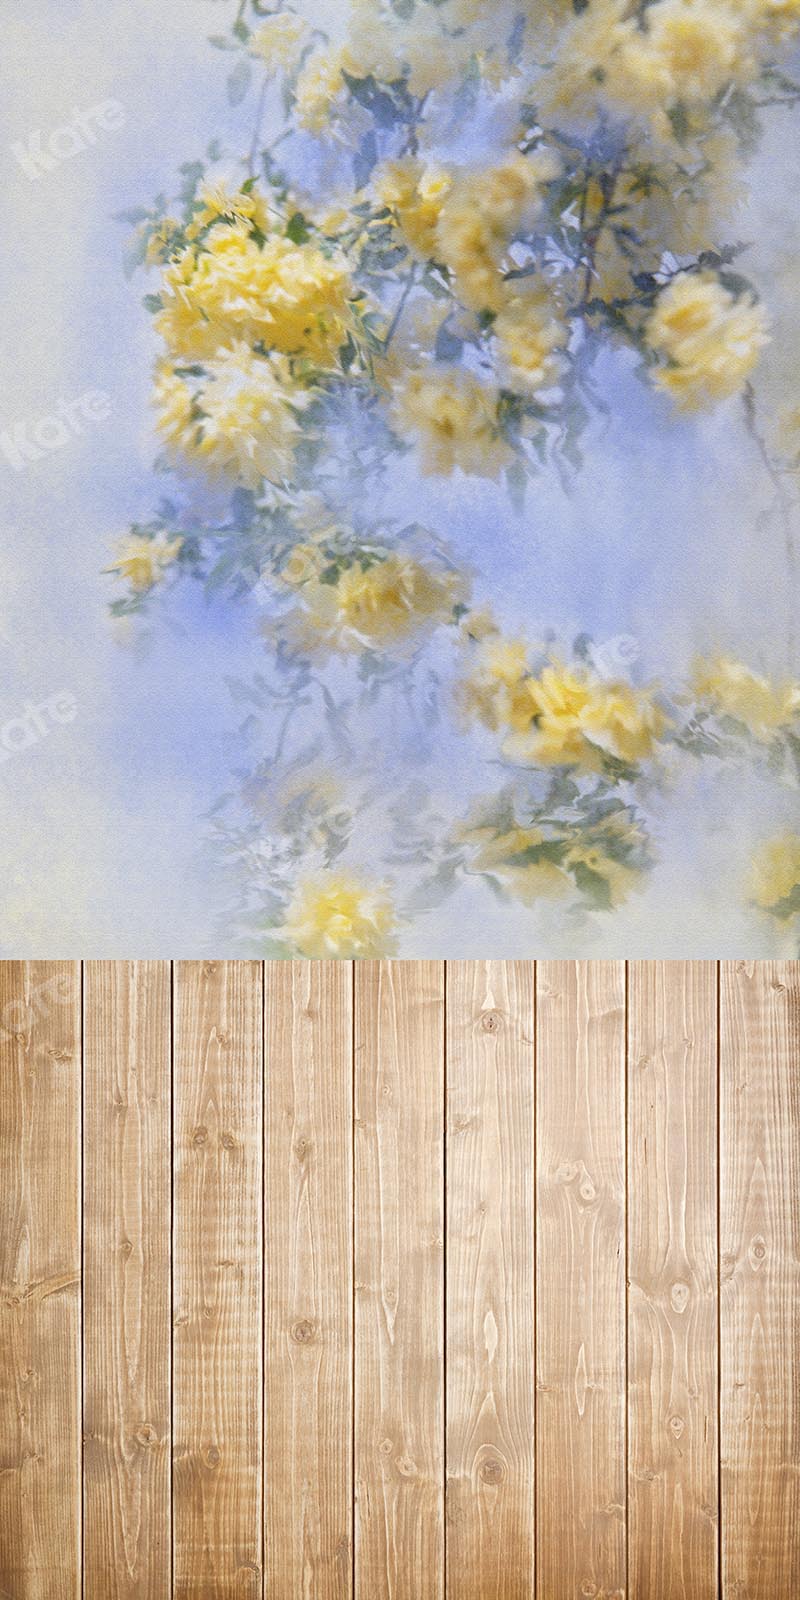 Kate Sweep Spring Floral Wood Floor Backdrop Designed by Chain Photography